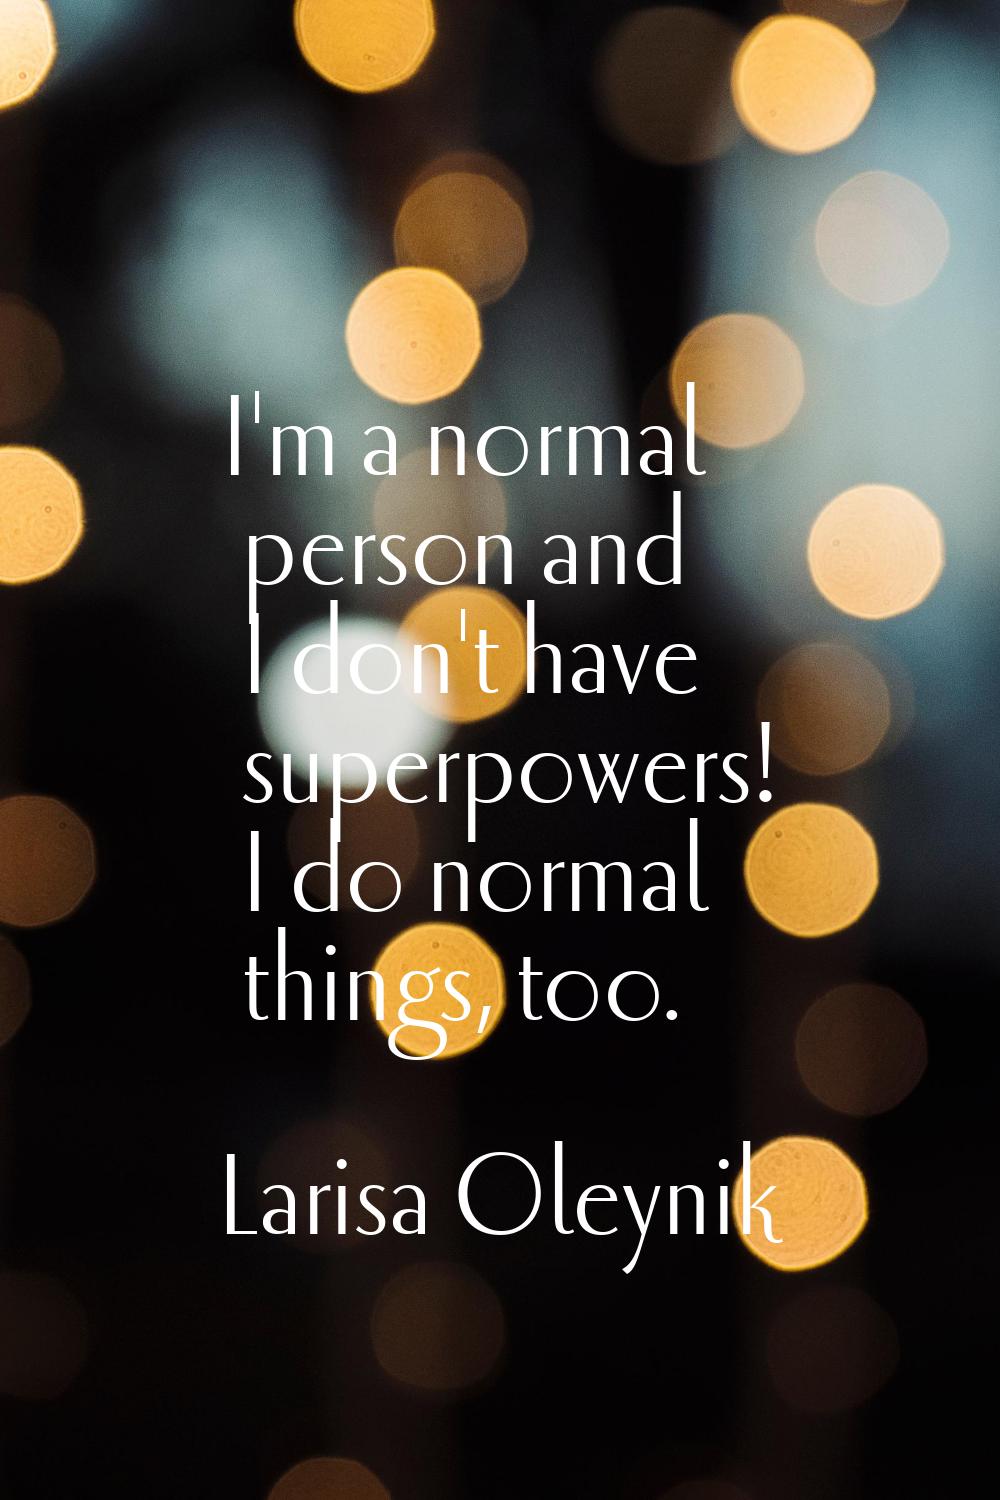 I'm a normal person and I don't have superpowers! I do normal things, too.